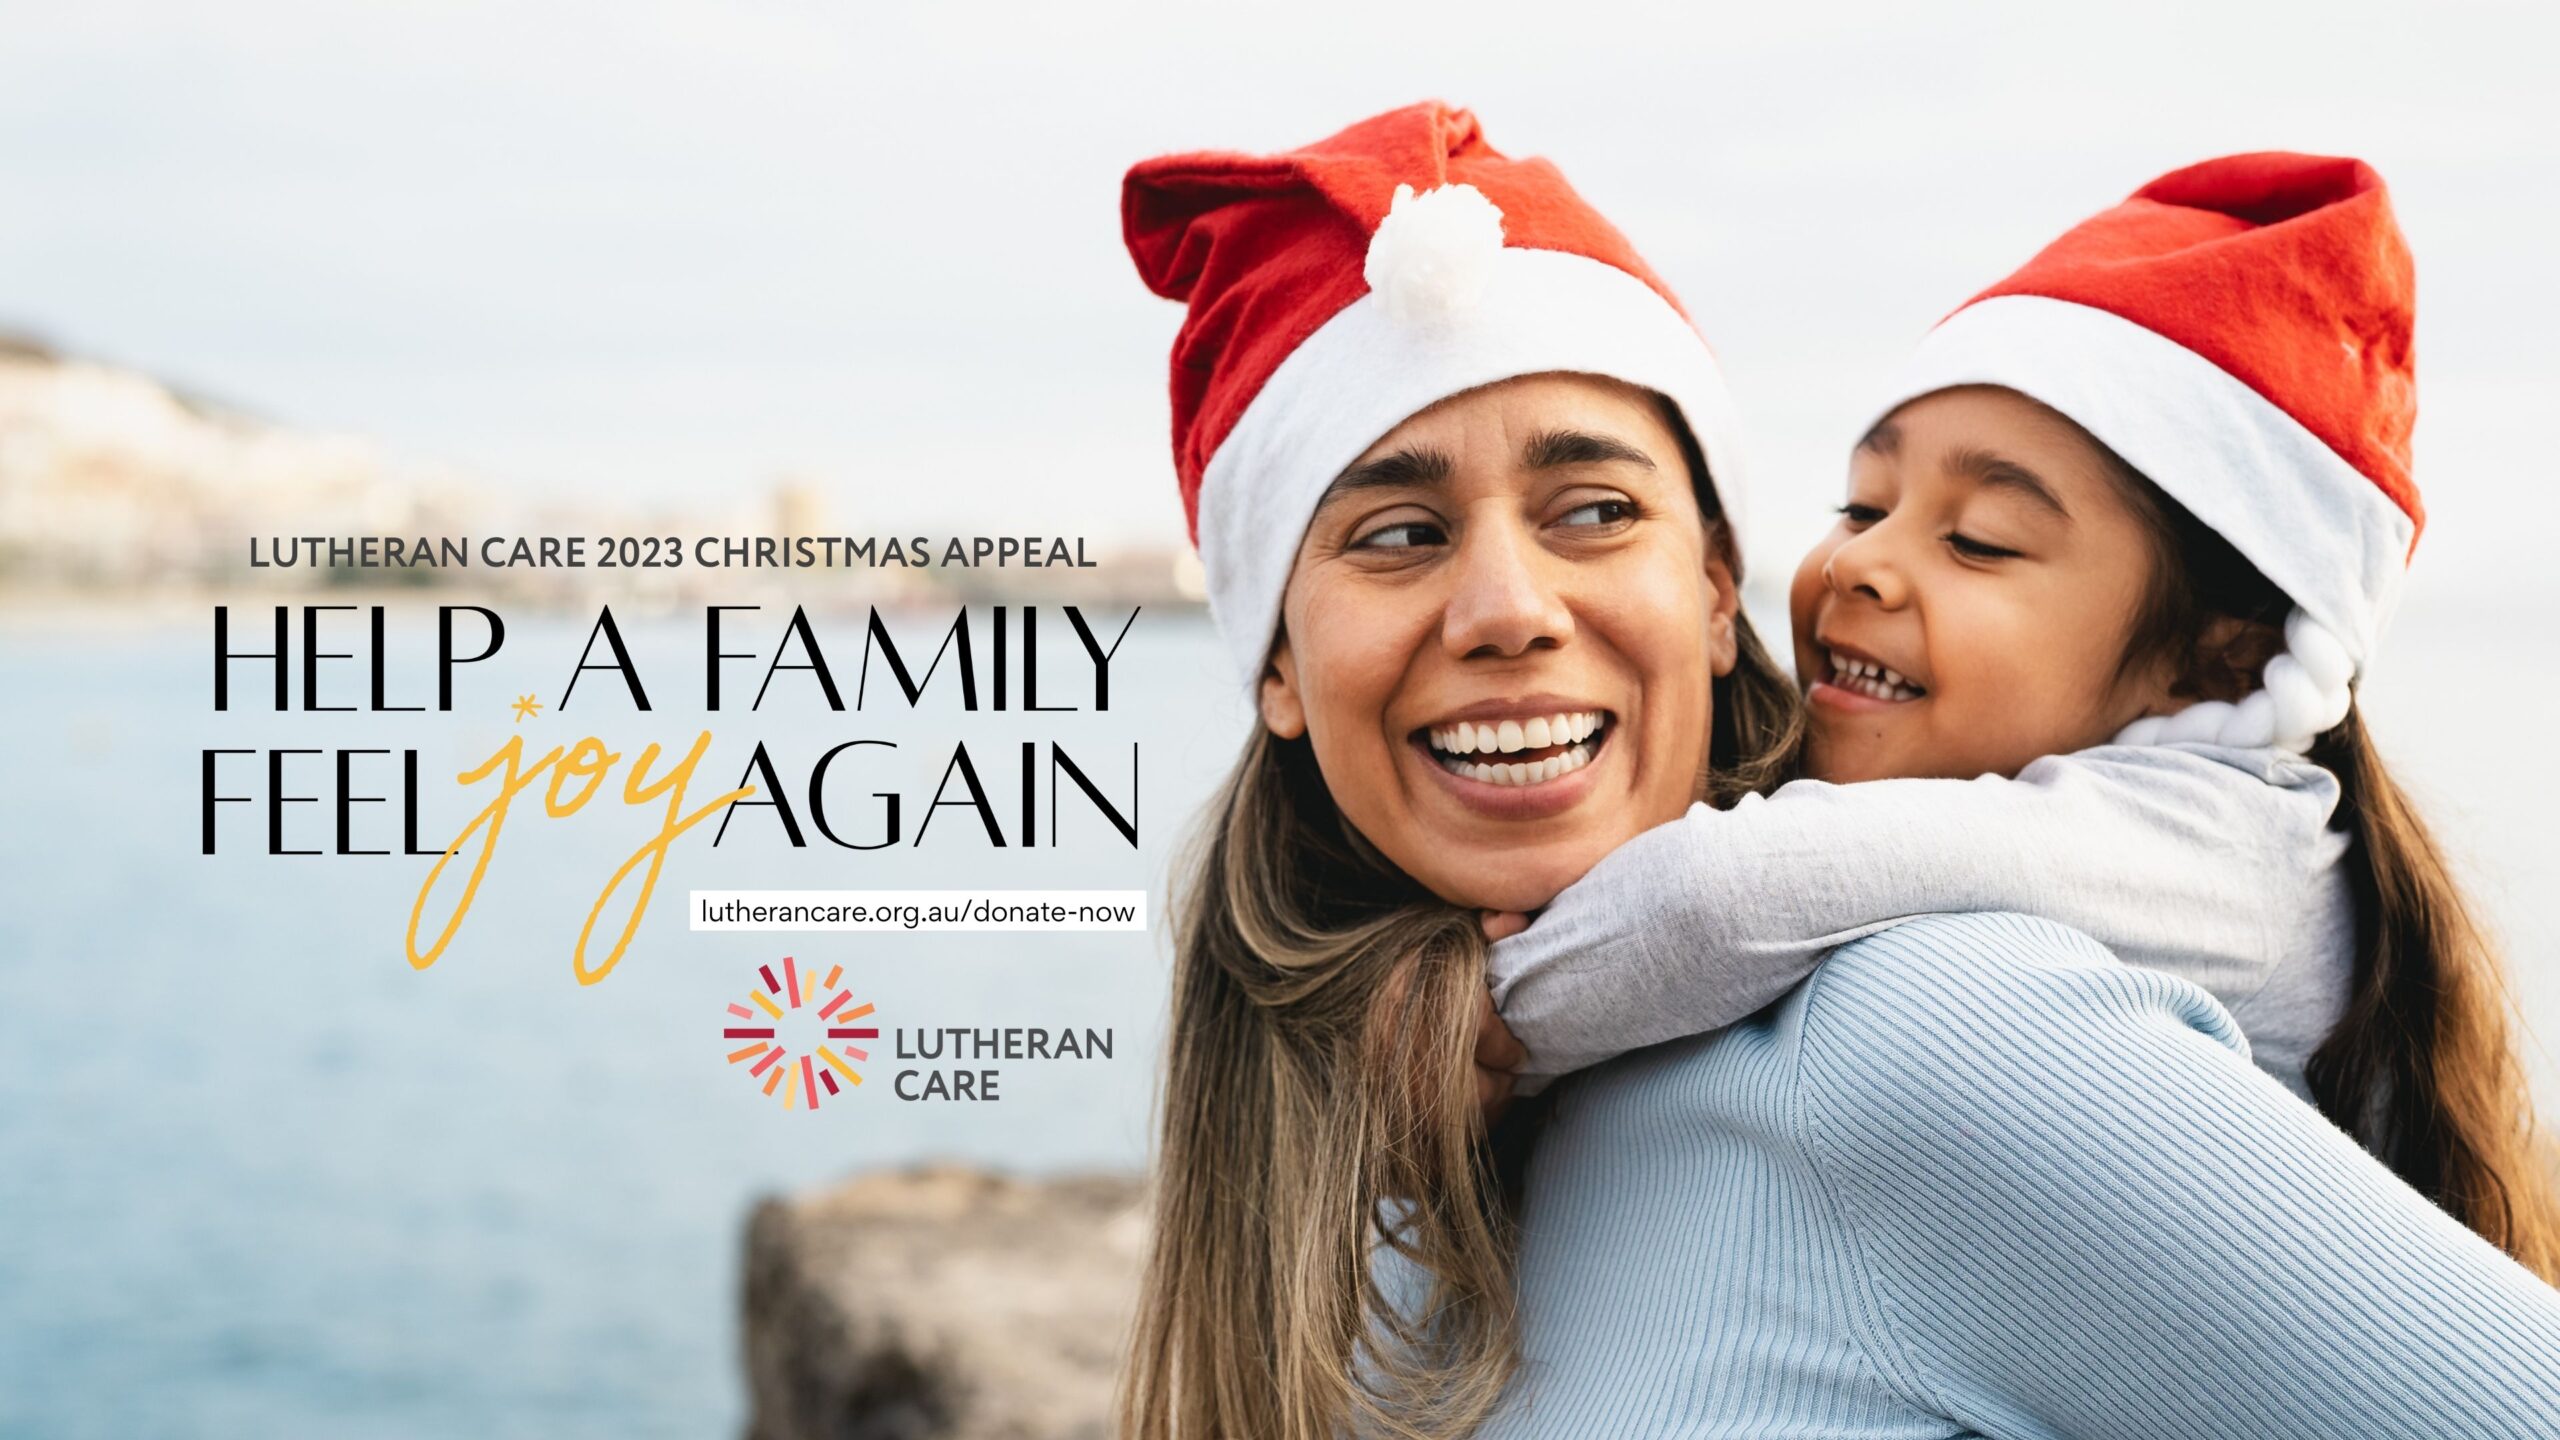 A mother is carrying her young daughter on her back, both are smiling and wearing Santa hats. Text reads Help a Family Feel Joy again with the Lutheran Care logo below.